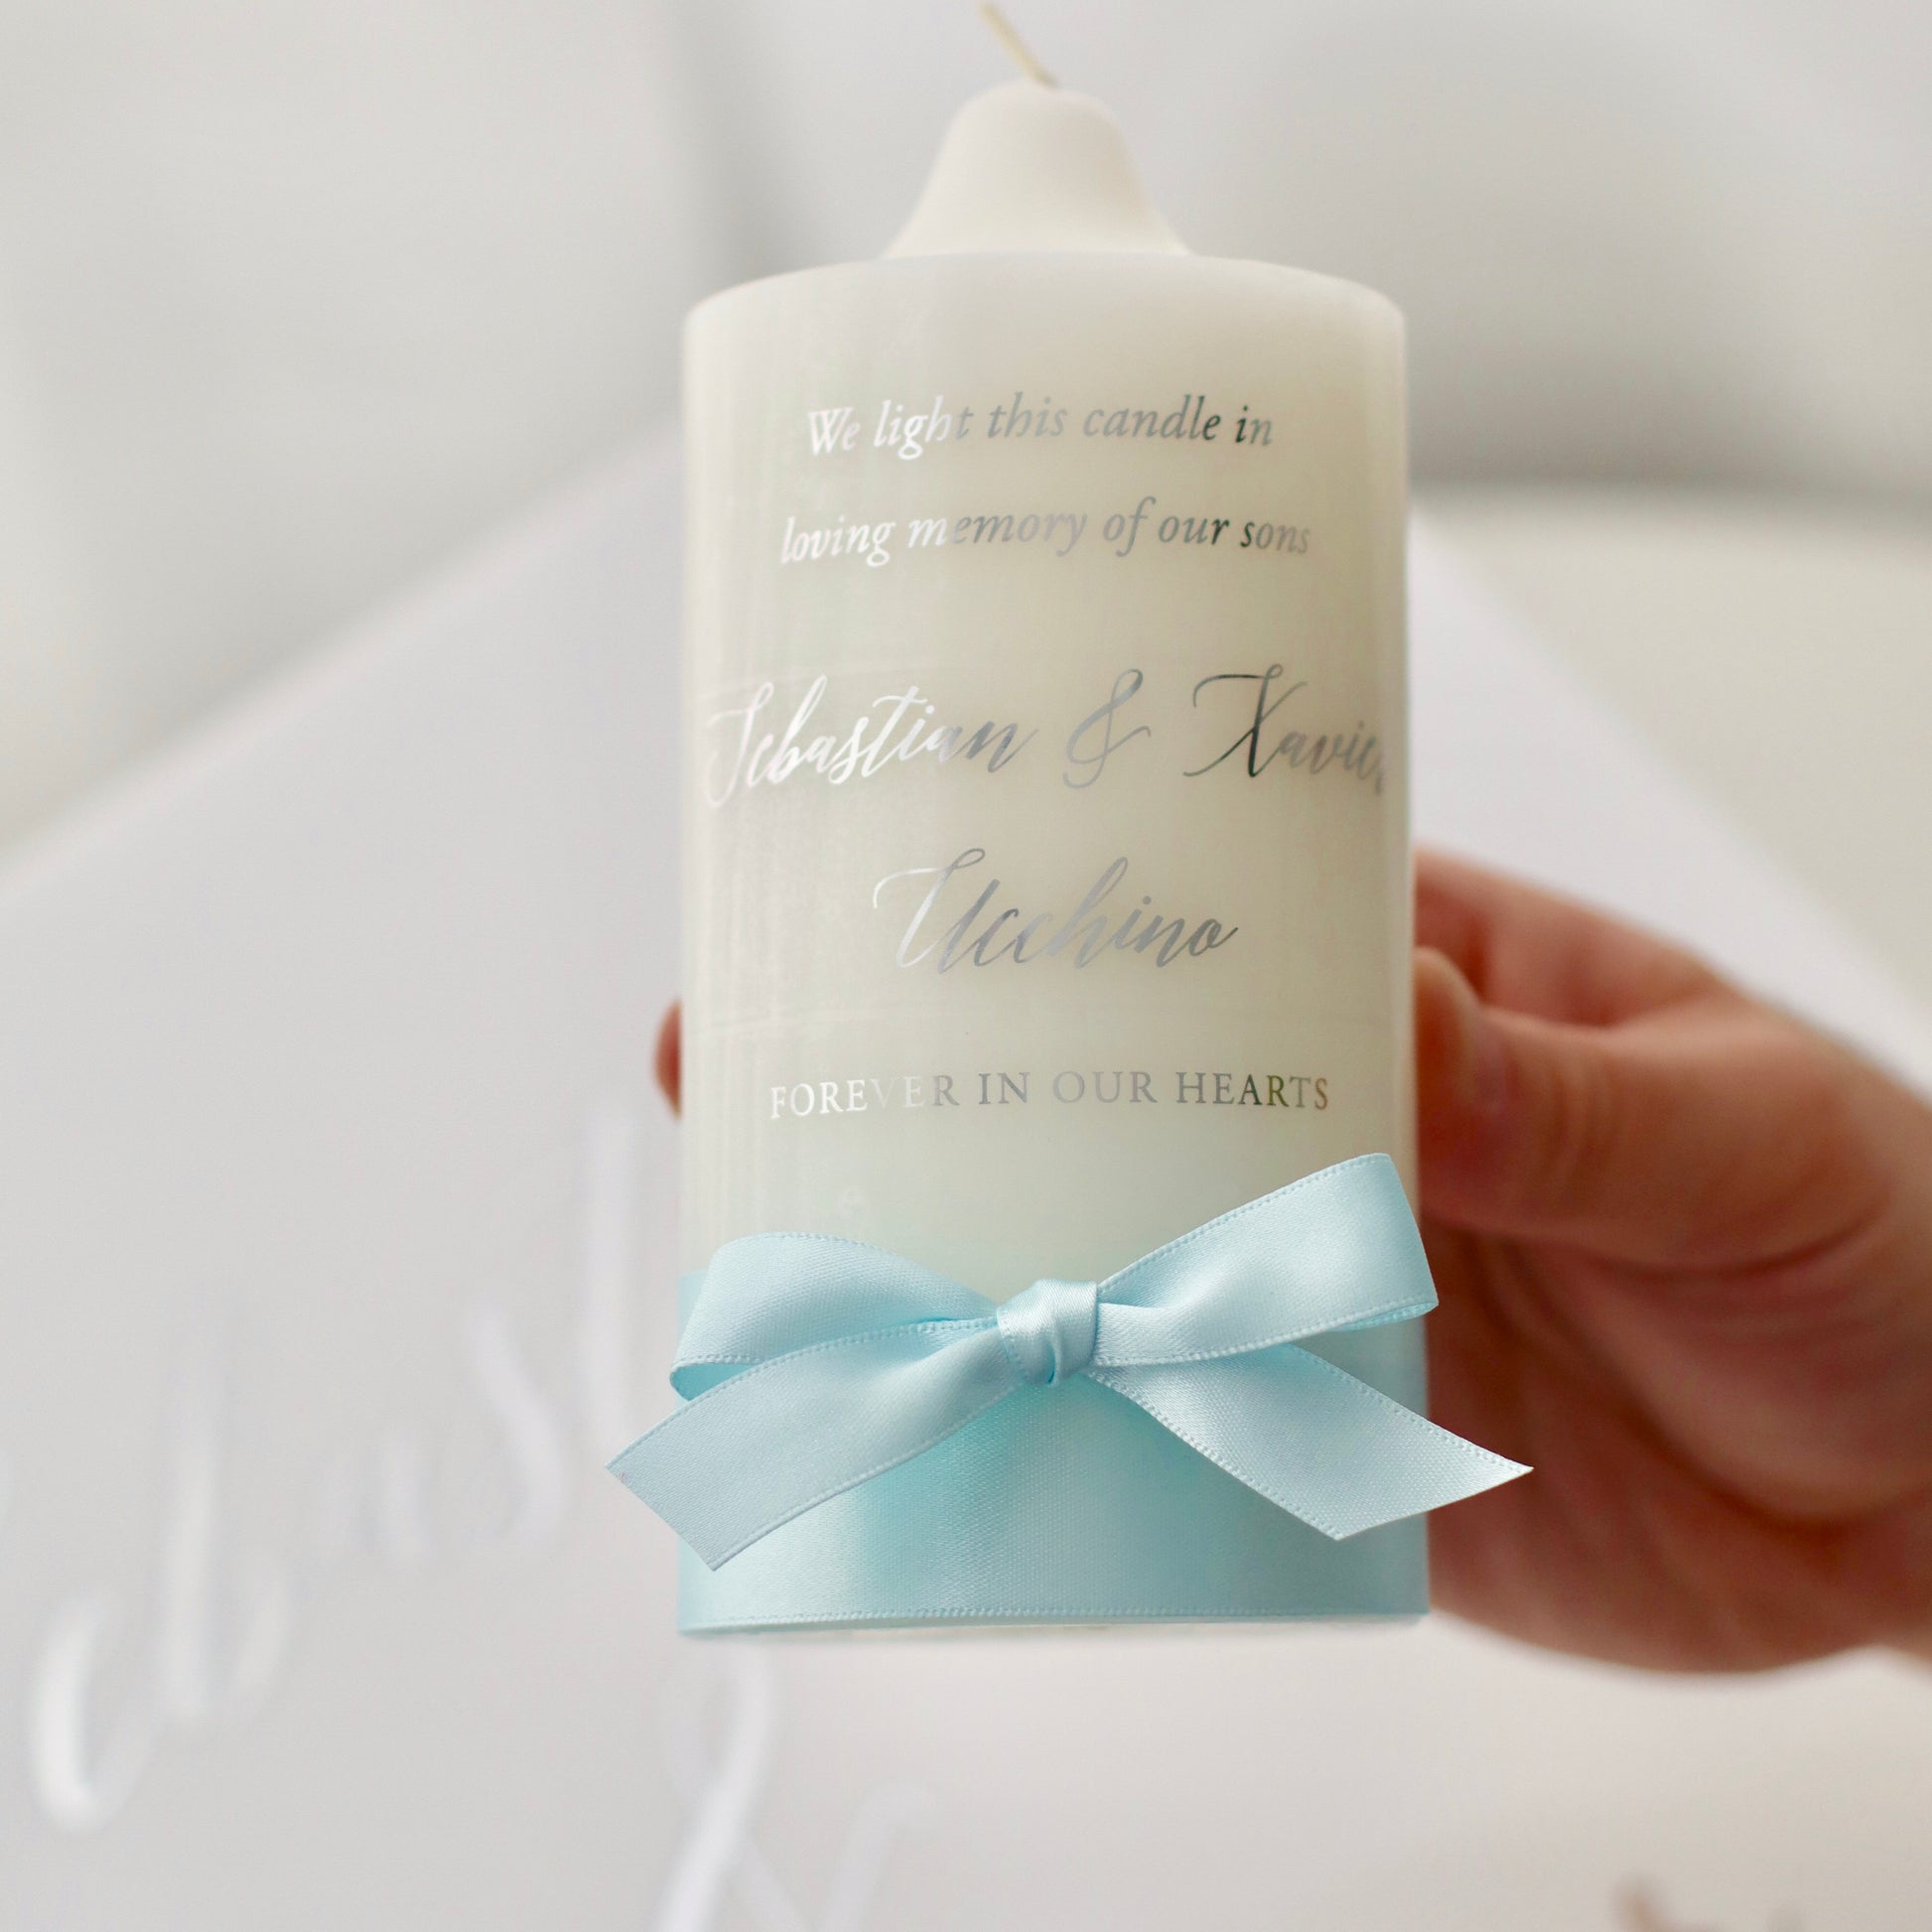 Our Memory Candle comes wrapped in a clear plastic with ribbon, made to match the candle.